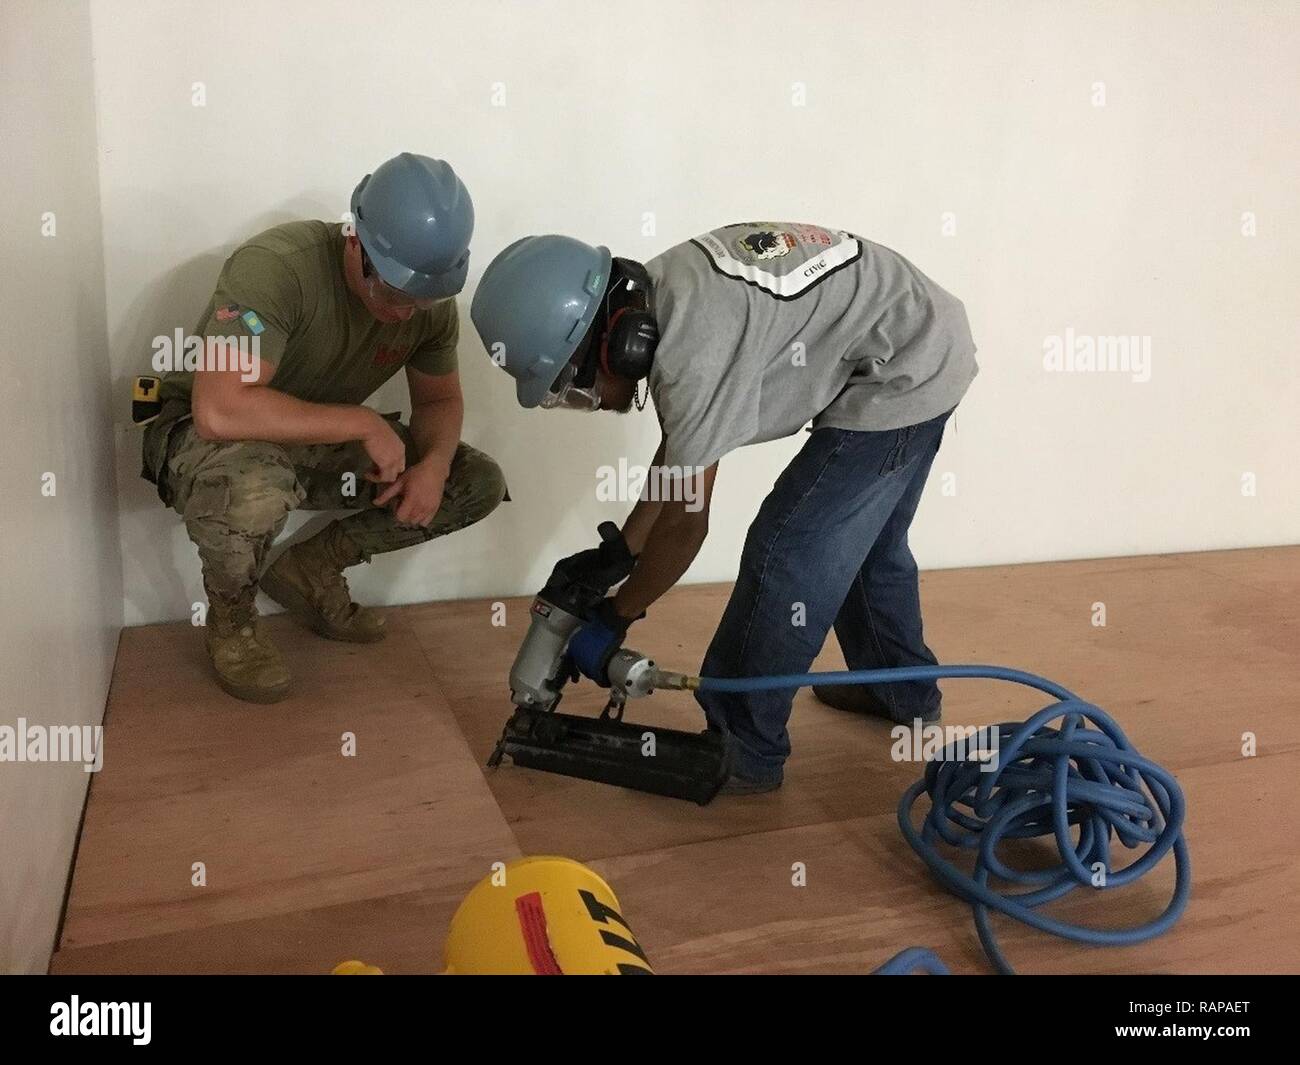 Dillion A Builder Apprentice Learns To Use The Pneumatic Nailer While